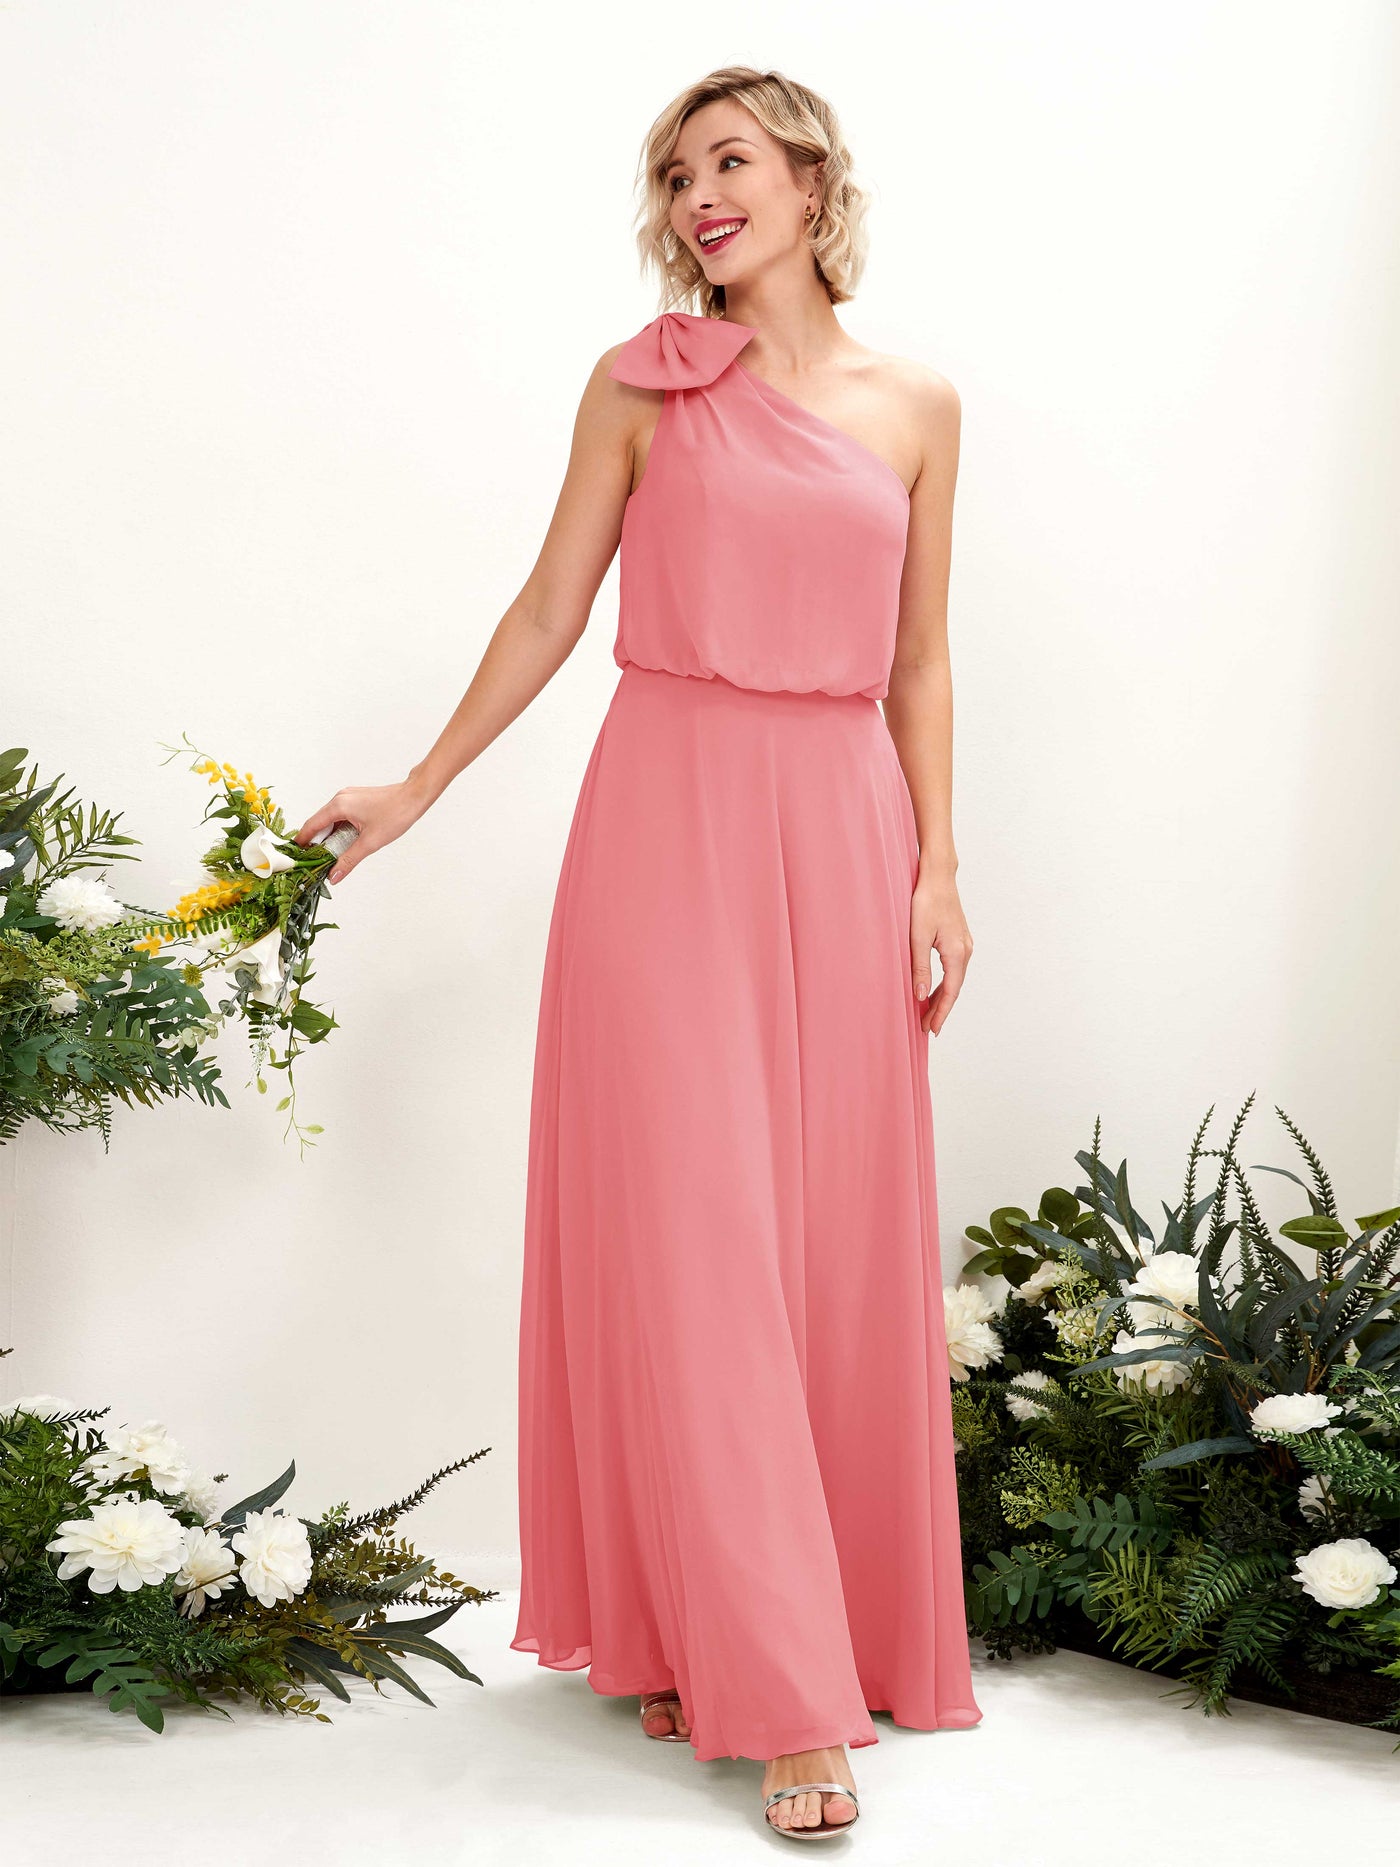 Coral Pink Bridesmaid Dresses Bridesmaid Dress A-line Chiffon One Shoulder Full Length Sleeveless Wedding Party Dress (81225530)#color_coral-pink